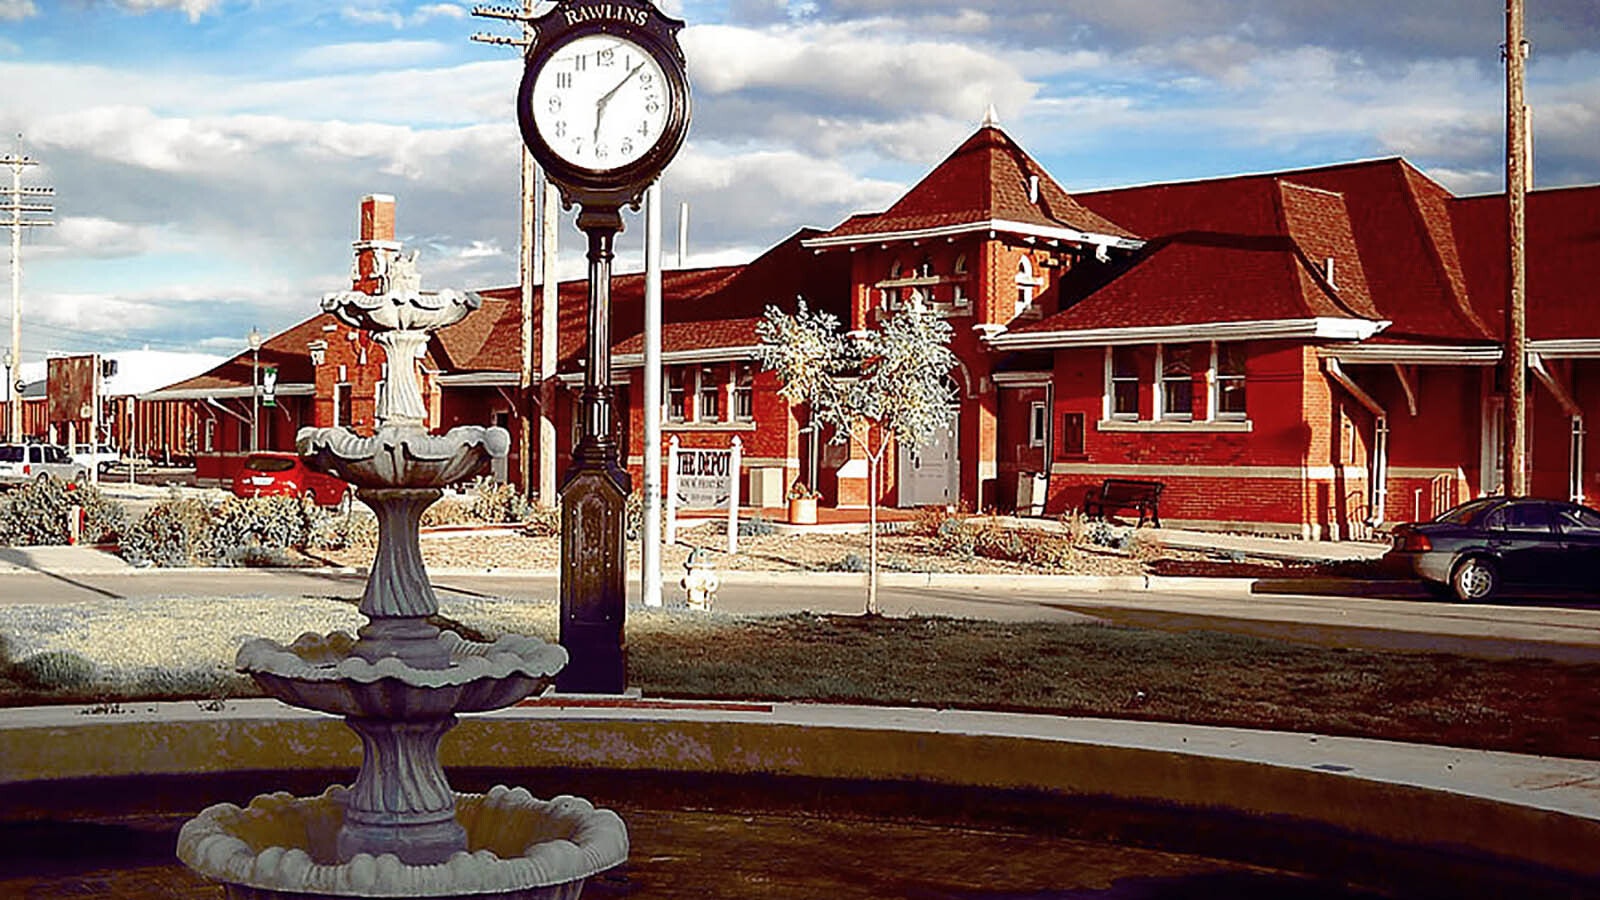 The old railroad depot is one of the jewels of downtown Rawlins, Wyoming.